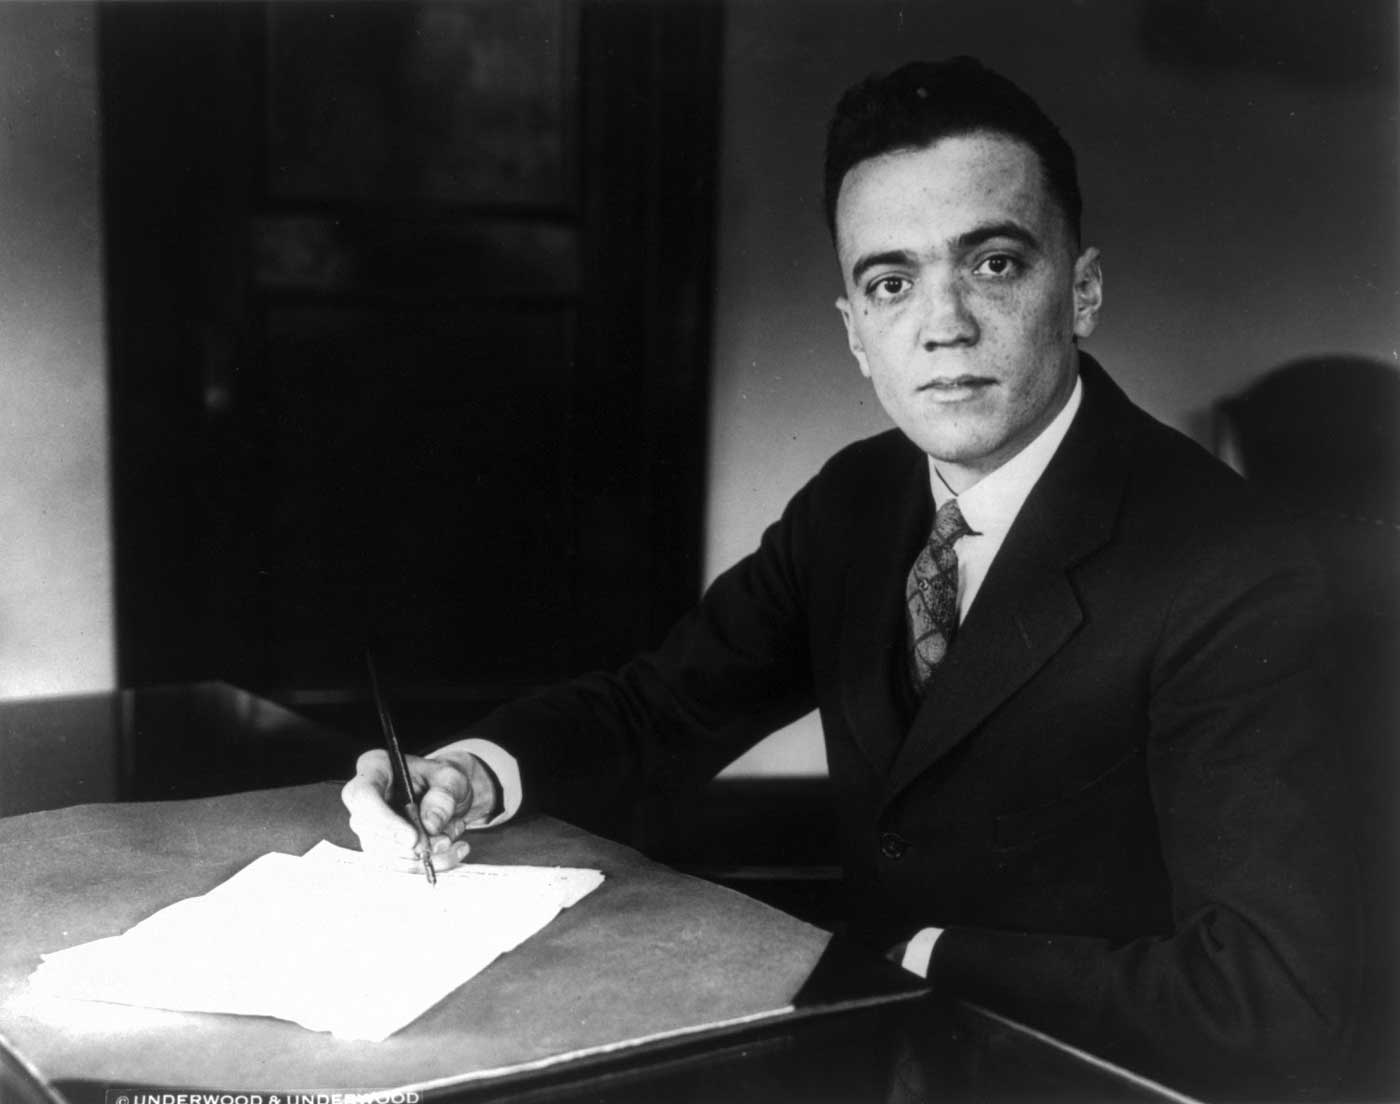 Black and white photograph of a young J. Edgar Hoover, Director of the FBI from 1924-1972, sitting at a desk holding a pen above a sheet of paper. The photograph was taken on May 16, 1932.